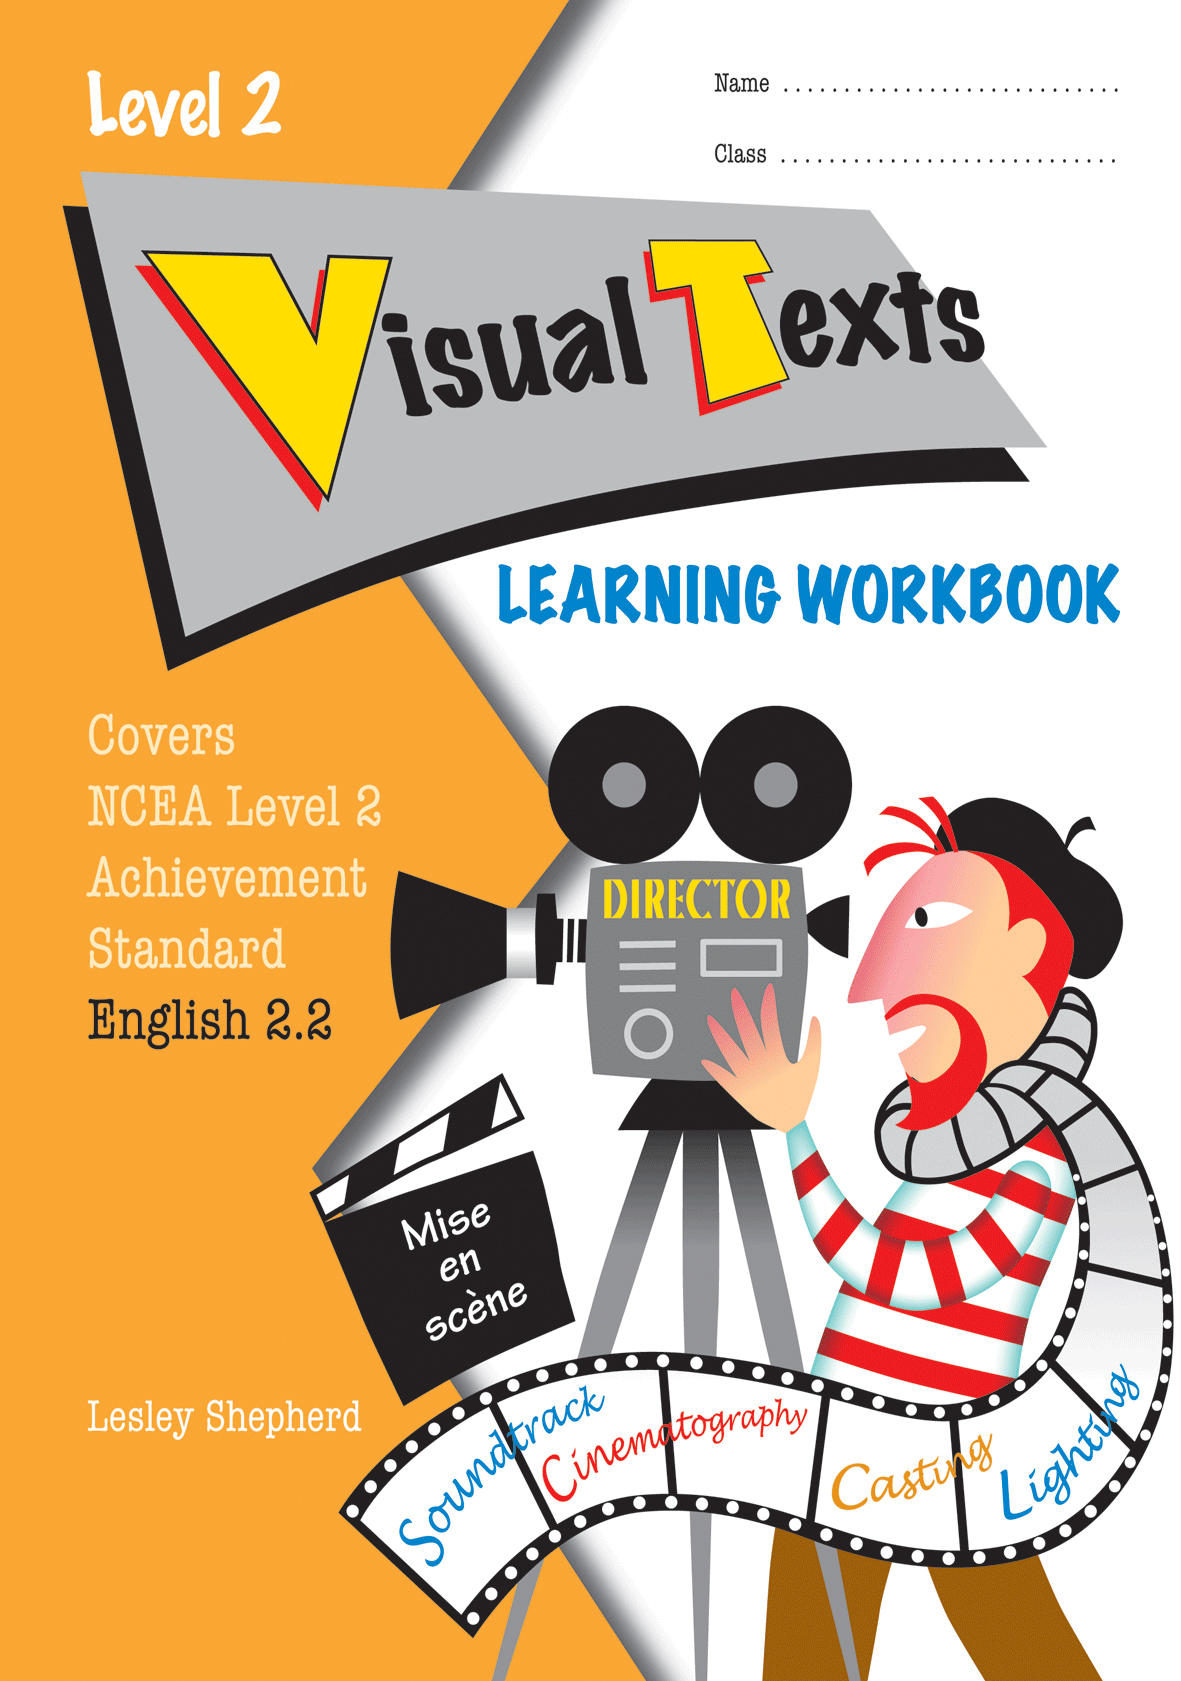 Level 2 Visual Texts 2.2 Learning Workbook